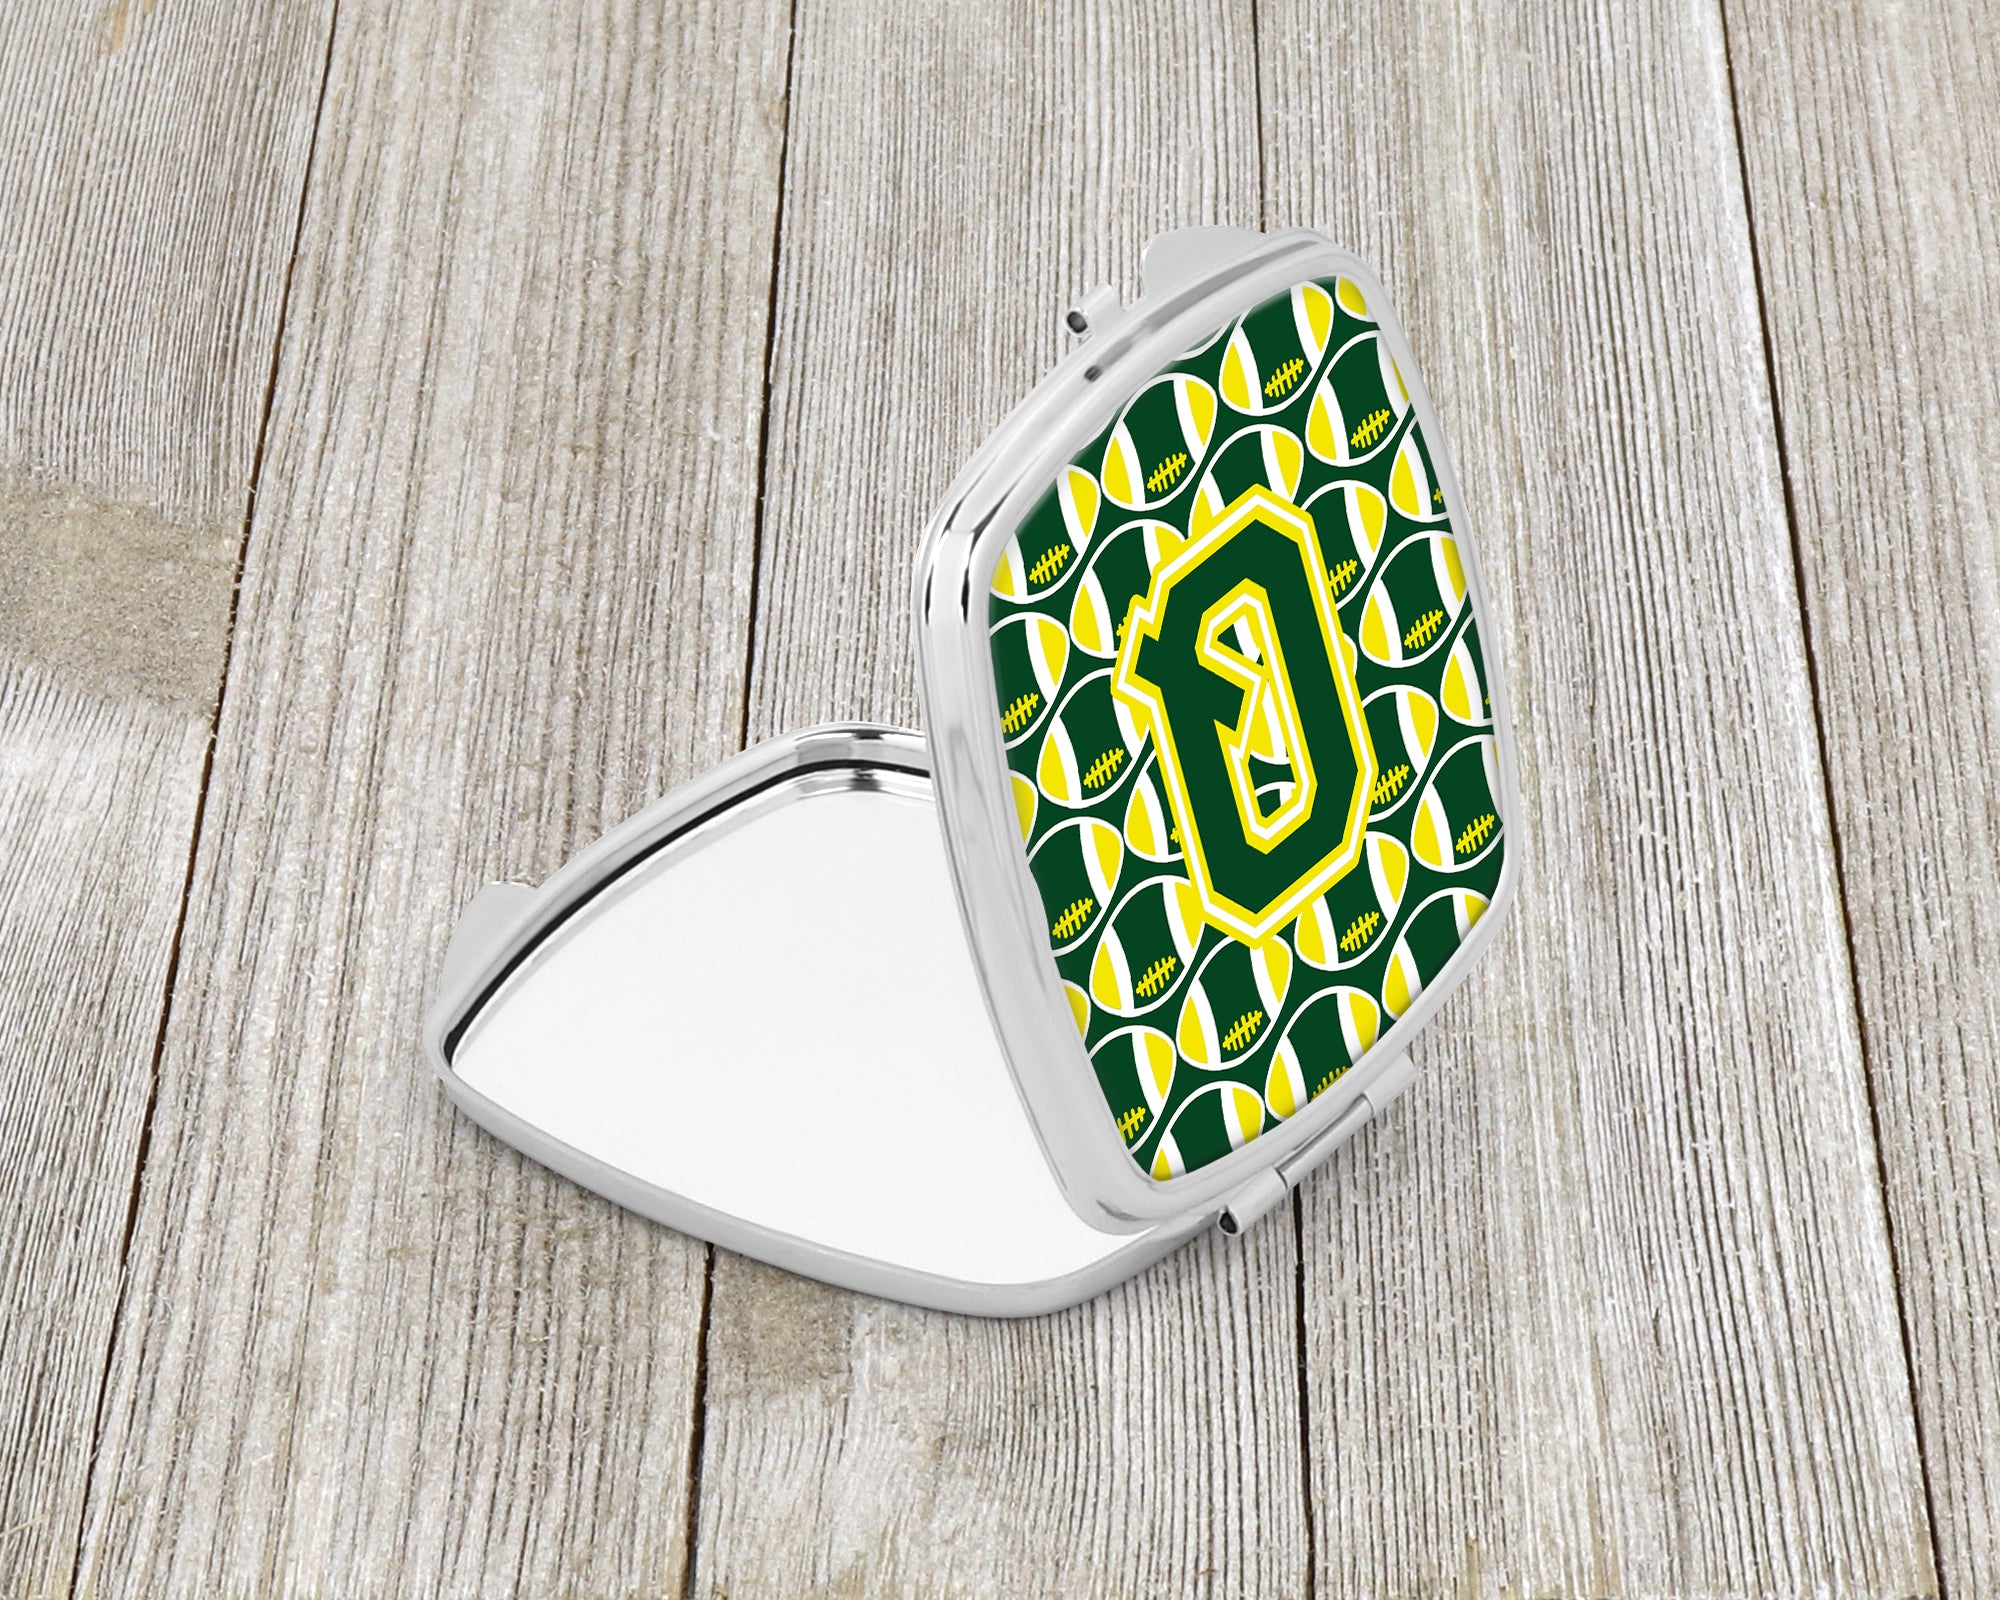 Letter Q Football Green and Yellow Compact Mirror CJ1075-QSCM  the-store.com.